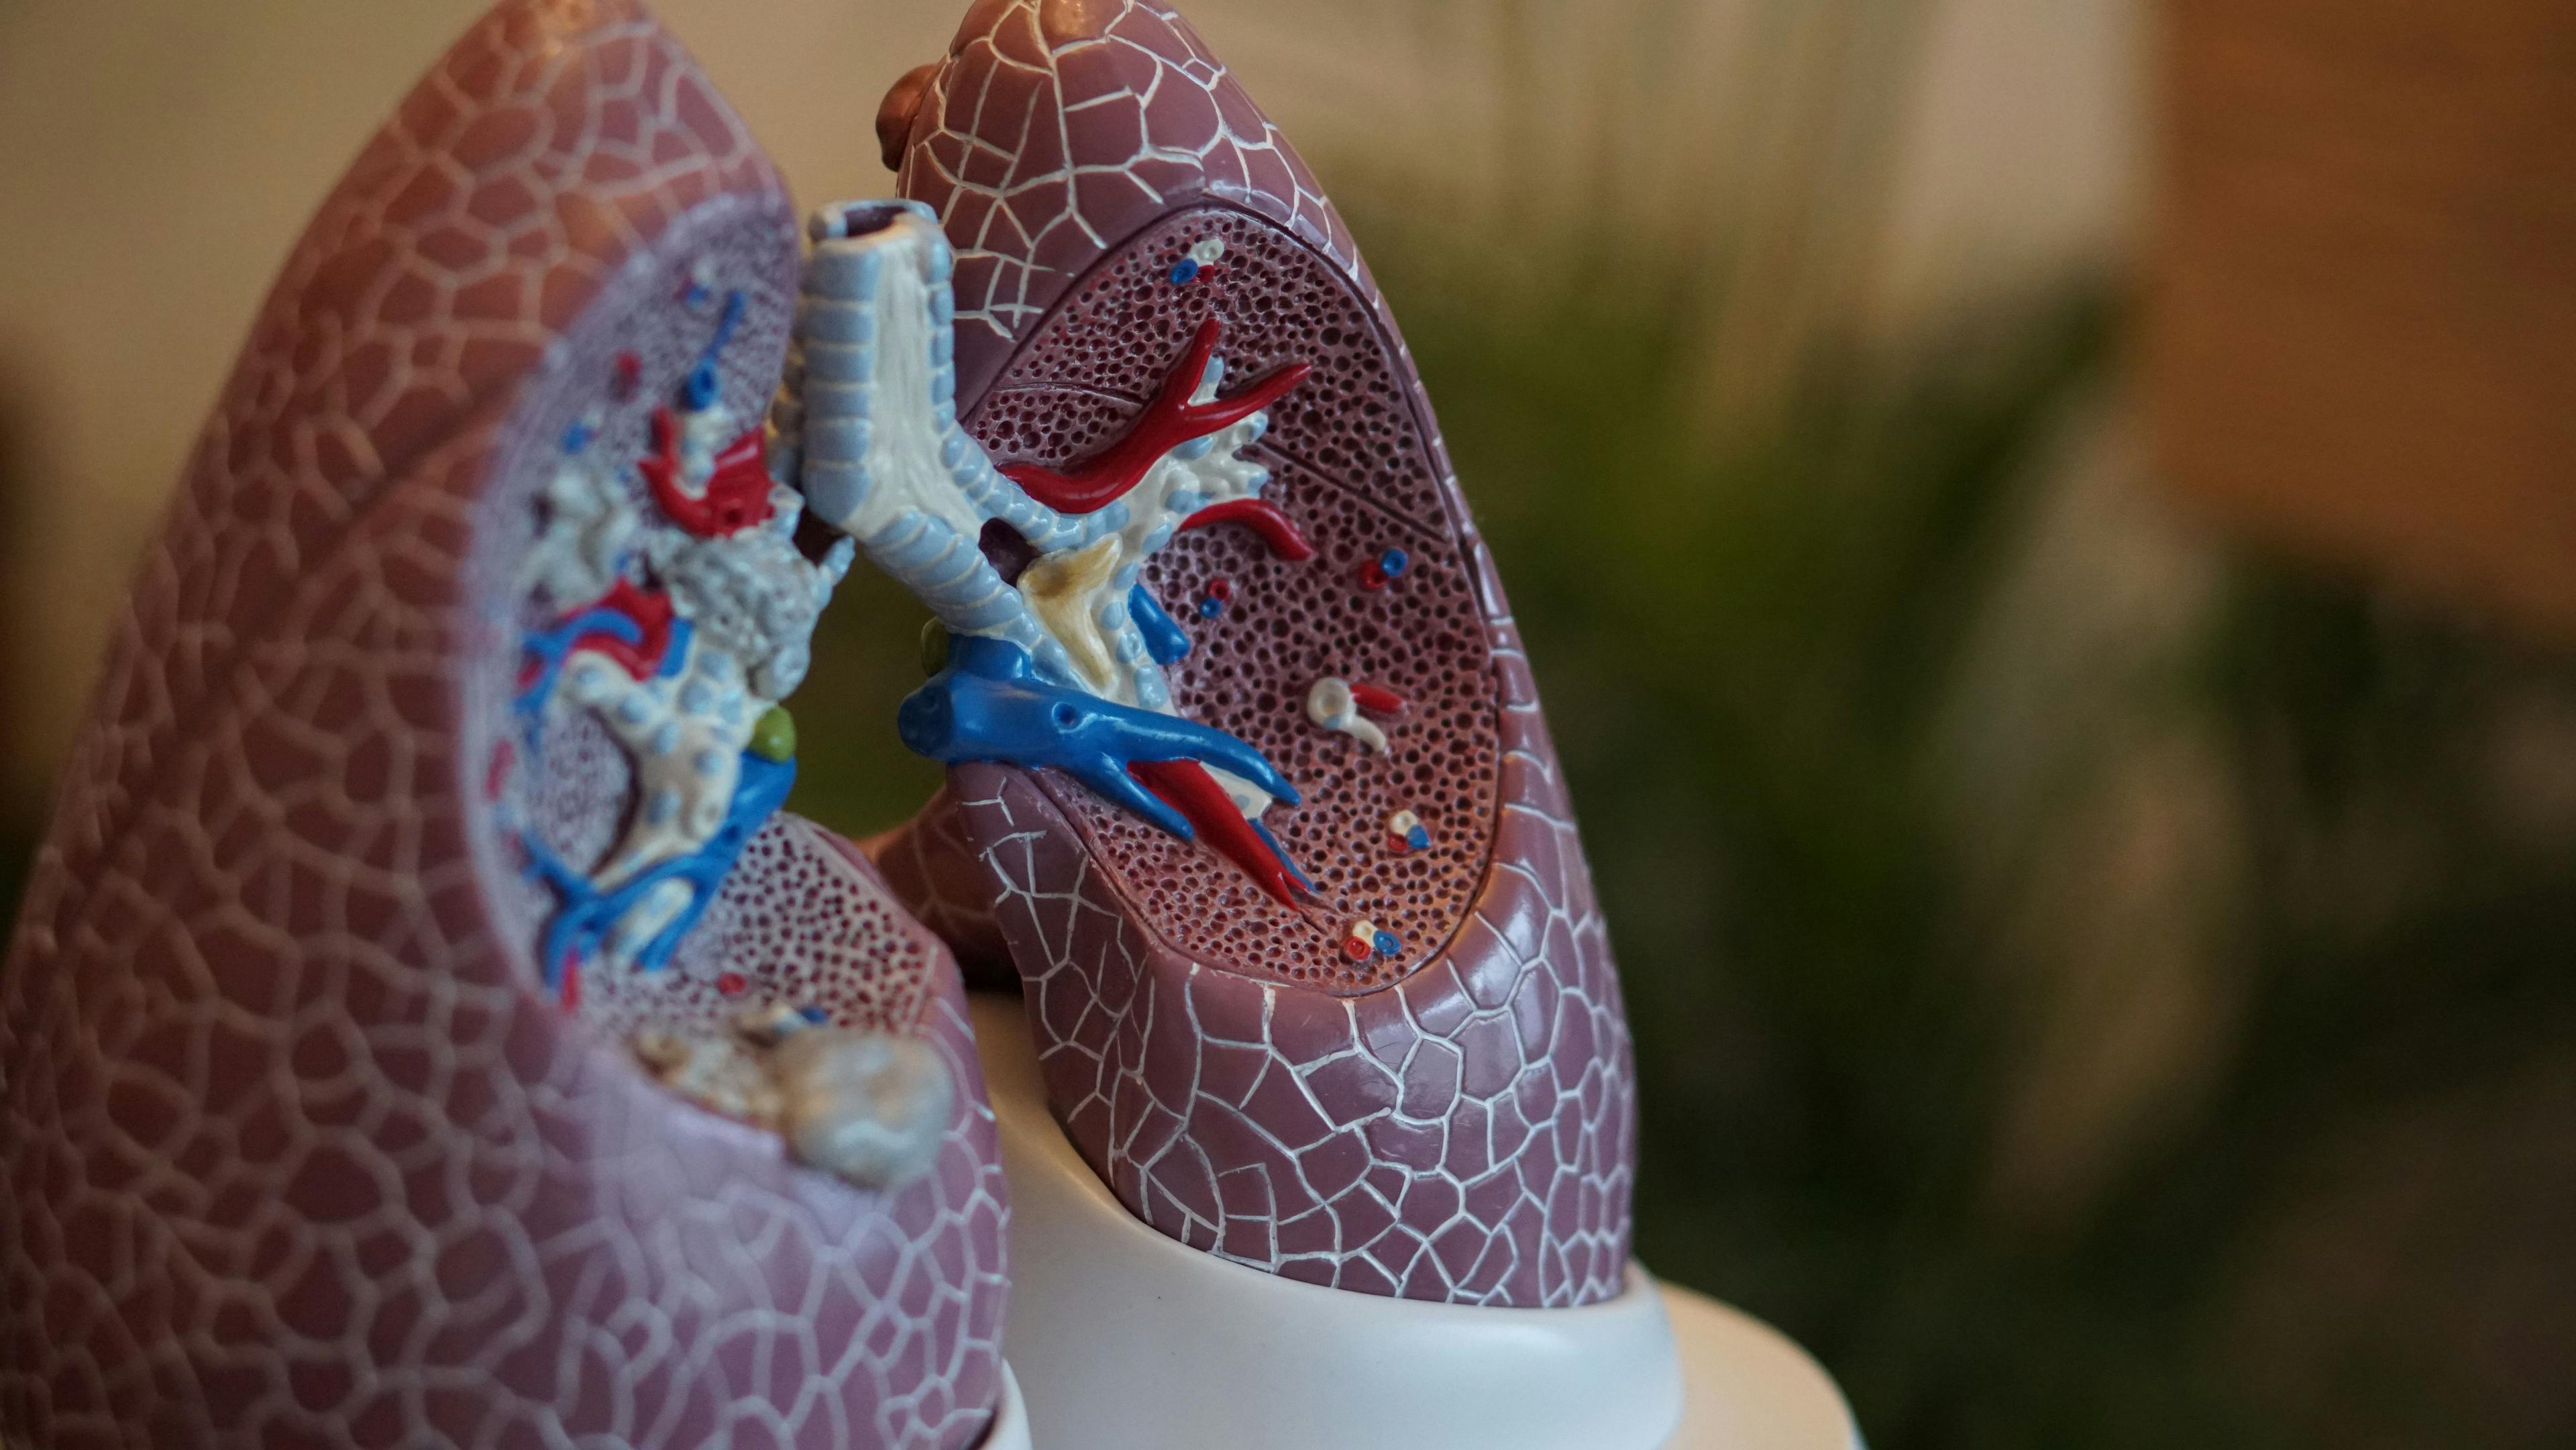 Top 5 Lung Cancer-Related Stories of 2021 